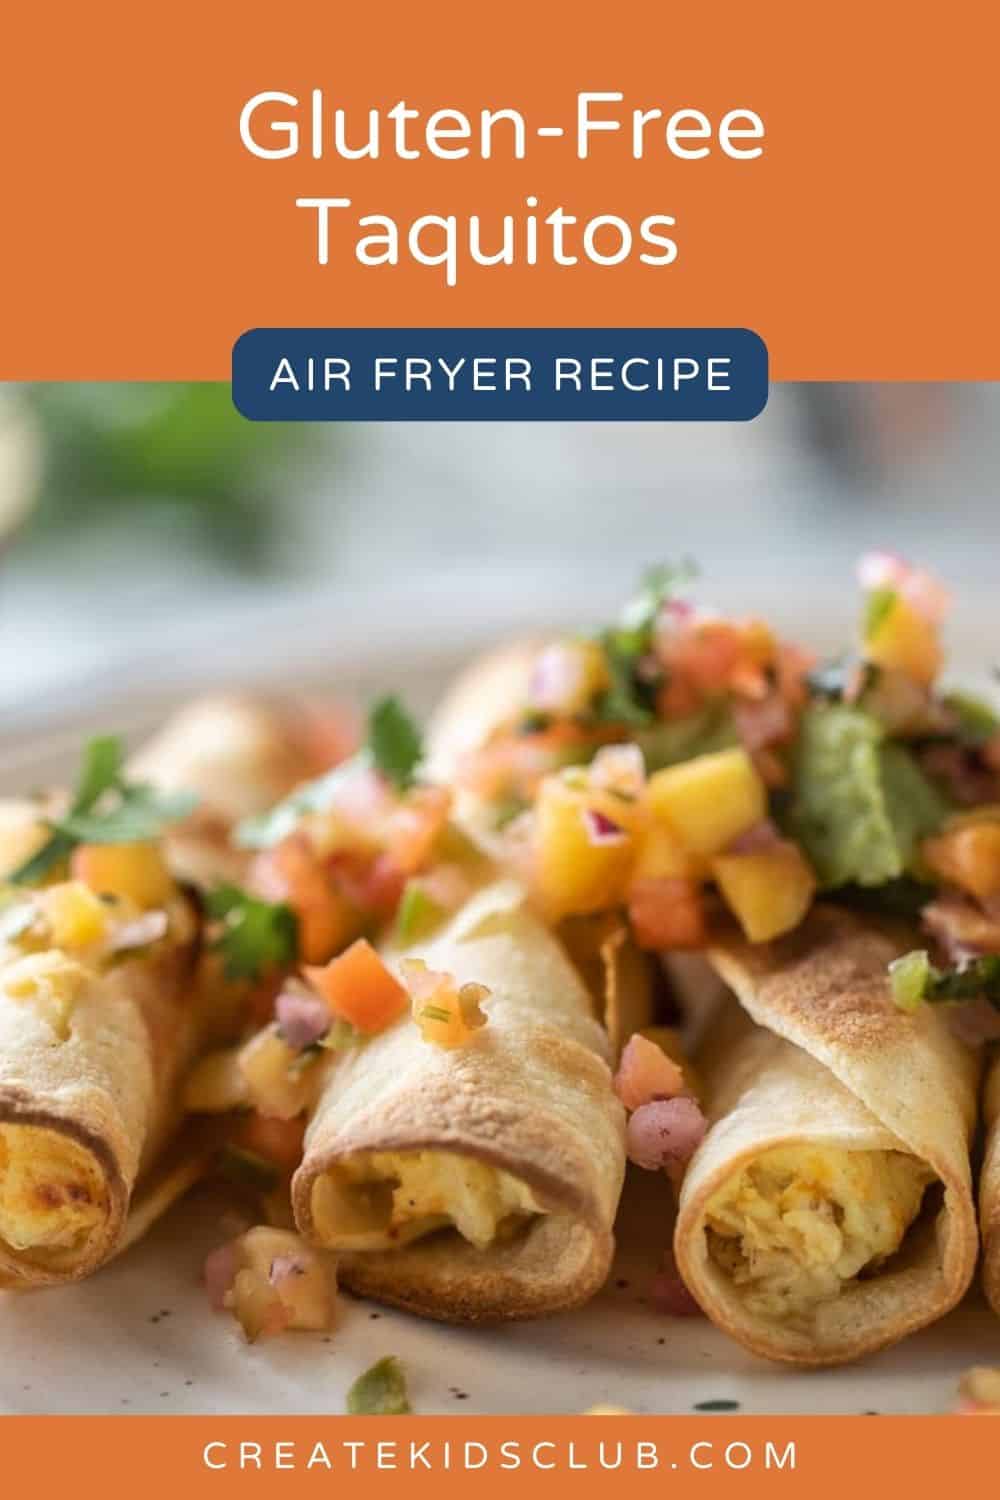 Pin of air fryer taquitos with salsa on top.